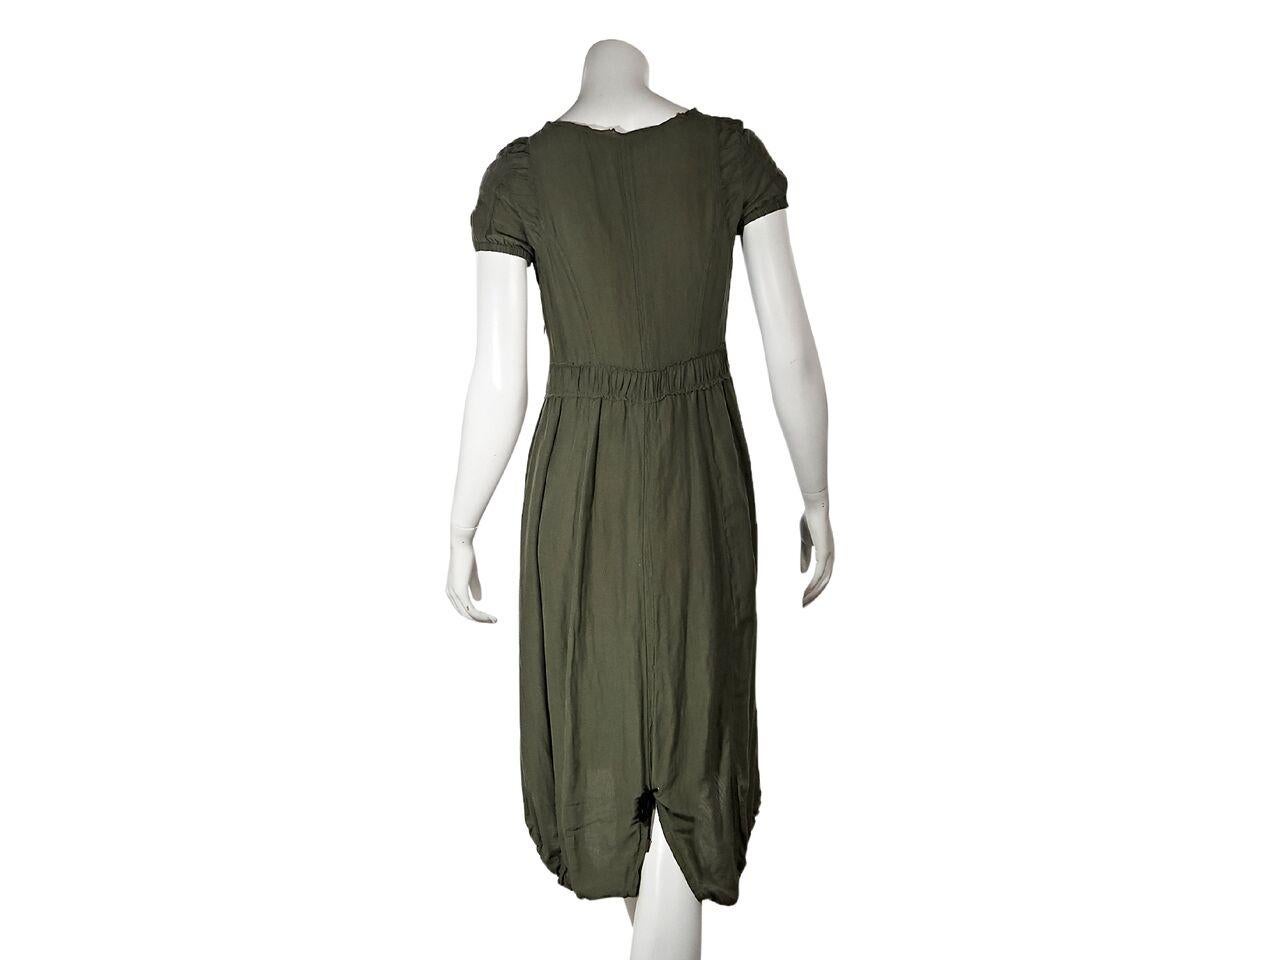 Product details:  Army green casual dress by McQ Alexander McQueen.  Scoopneck.  Short sleeves.  Elastic cuffs.  Concealed side zip closure.  Drawstring hem with center back slit.  27